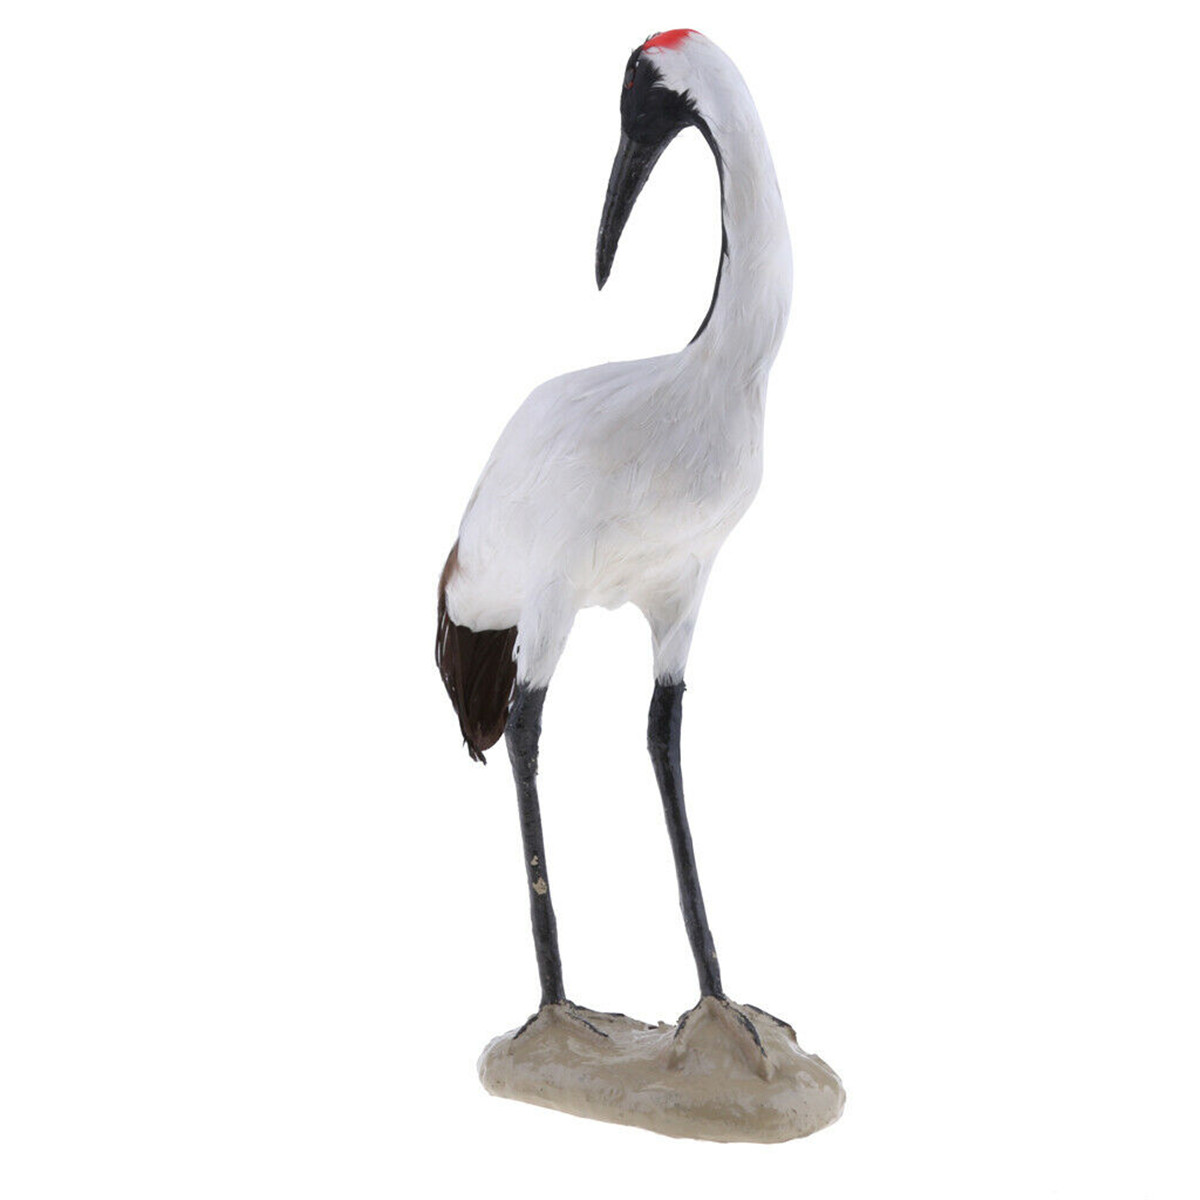 Realistic-Red-crowned-Crane-Outdoor-Home-Lawn-Pond-Ornament-Sculpture-Decorations-1554882